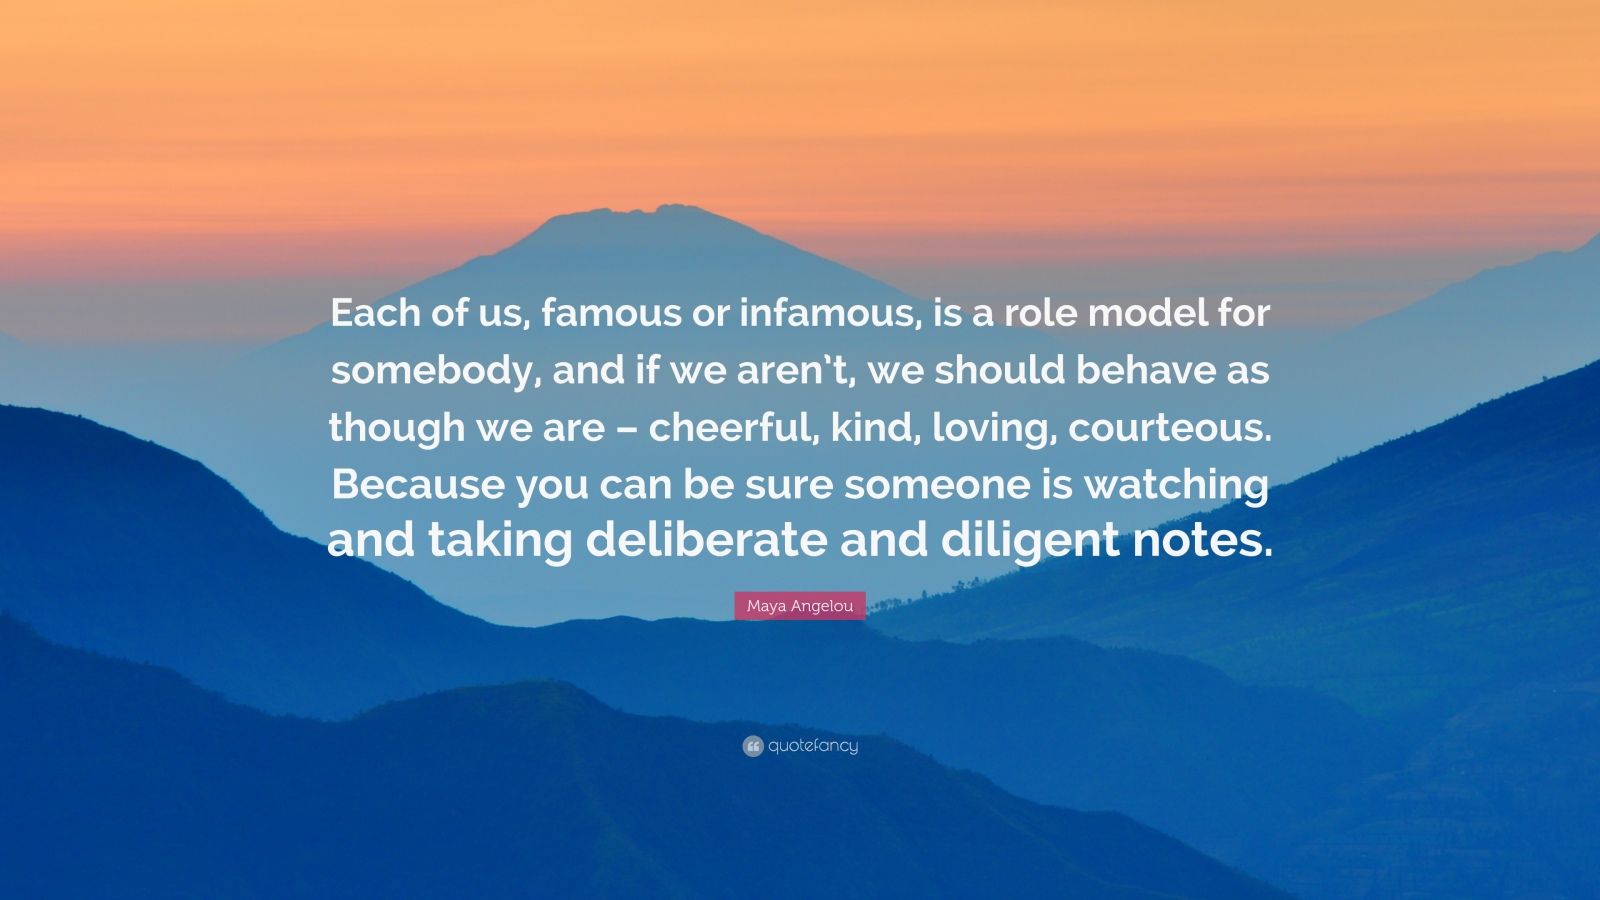 Maya Angelou Quote “Each of us famous or infamous is a role